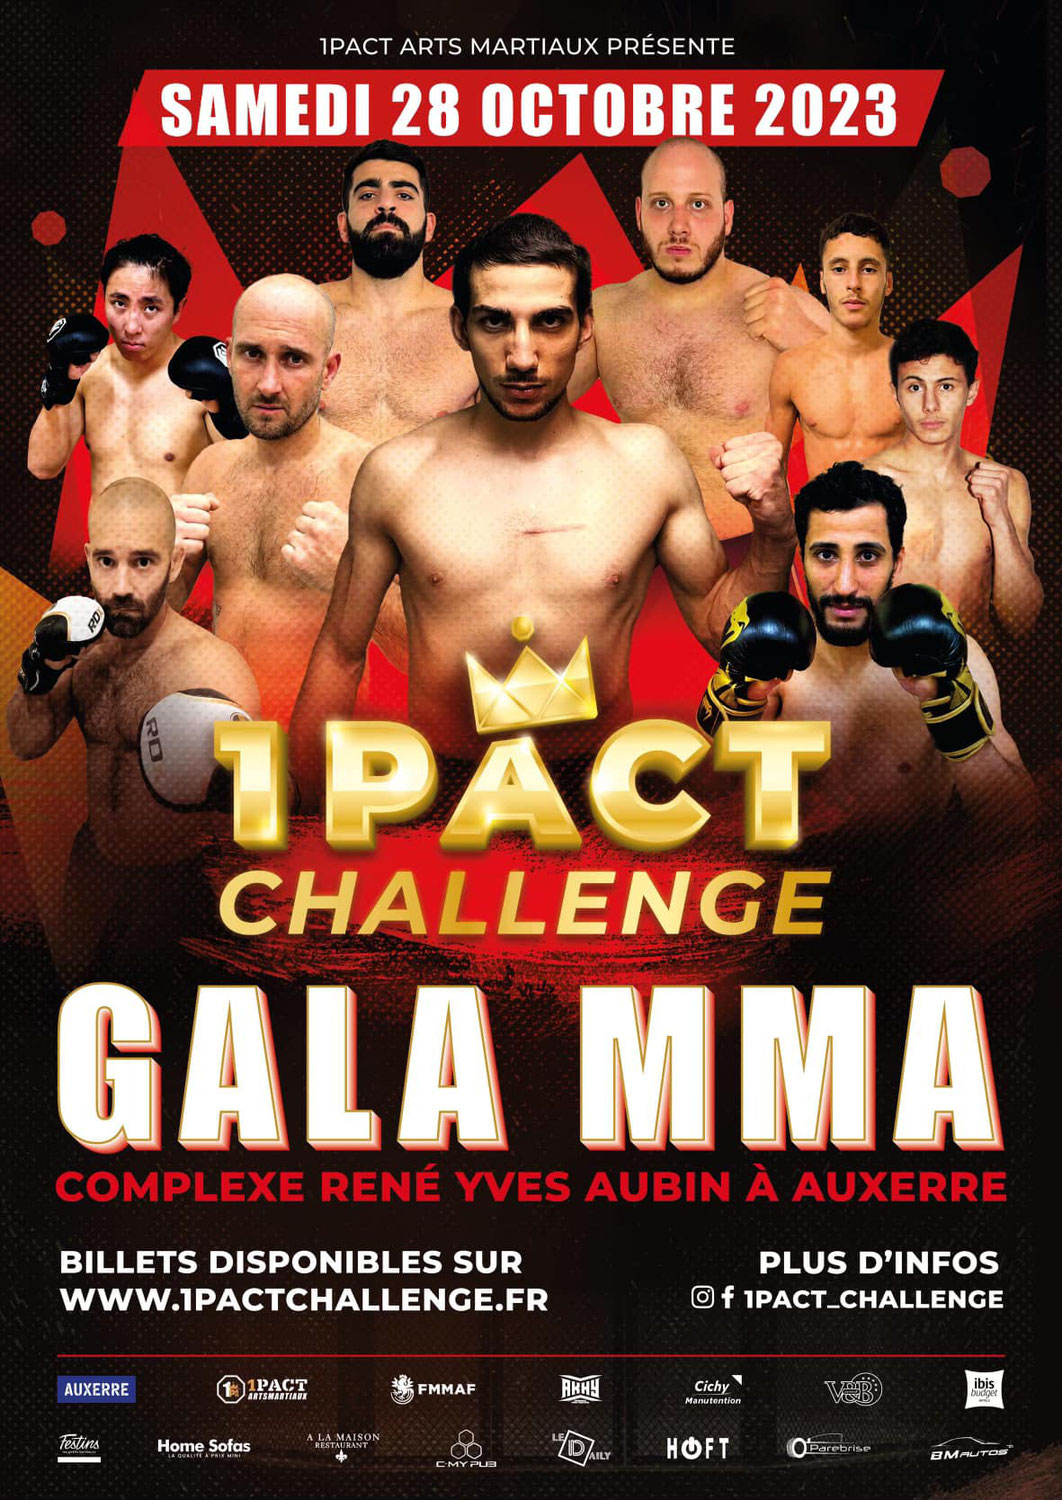 GALA MMA - 1 PACT CHALLENGE - AUXERRE 